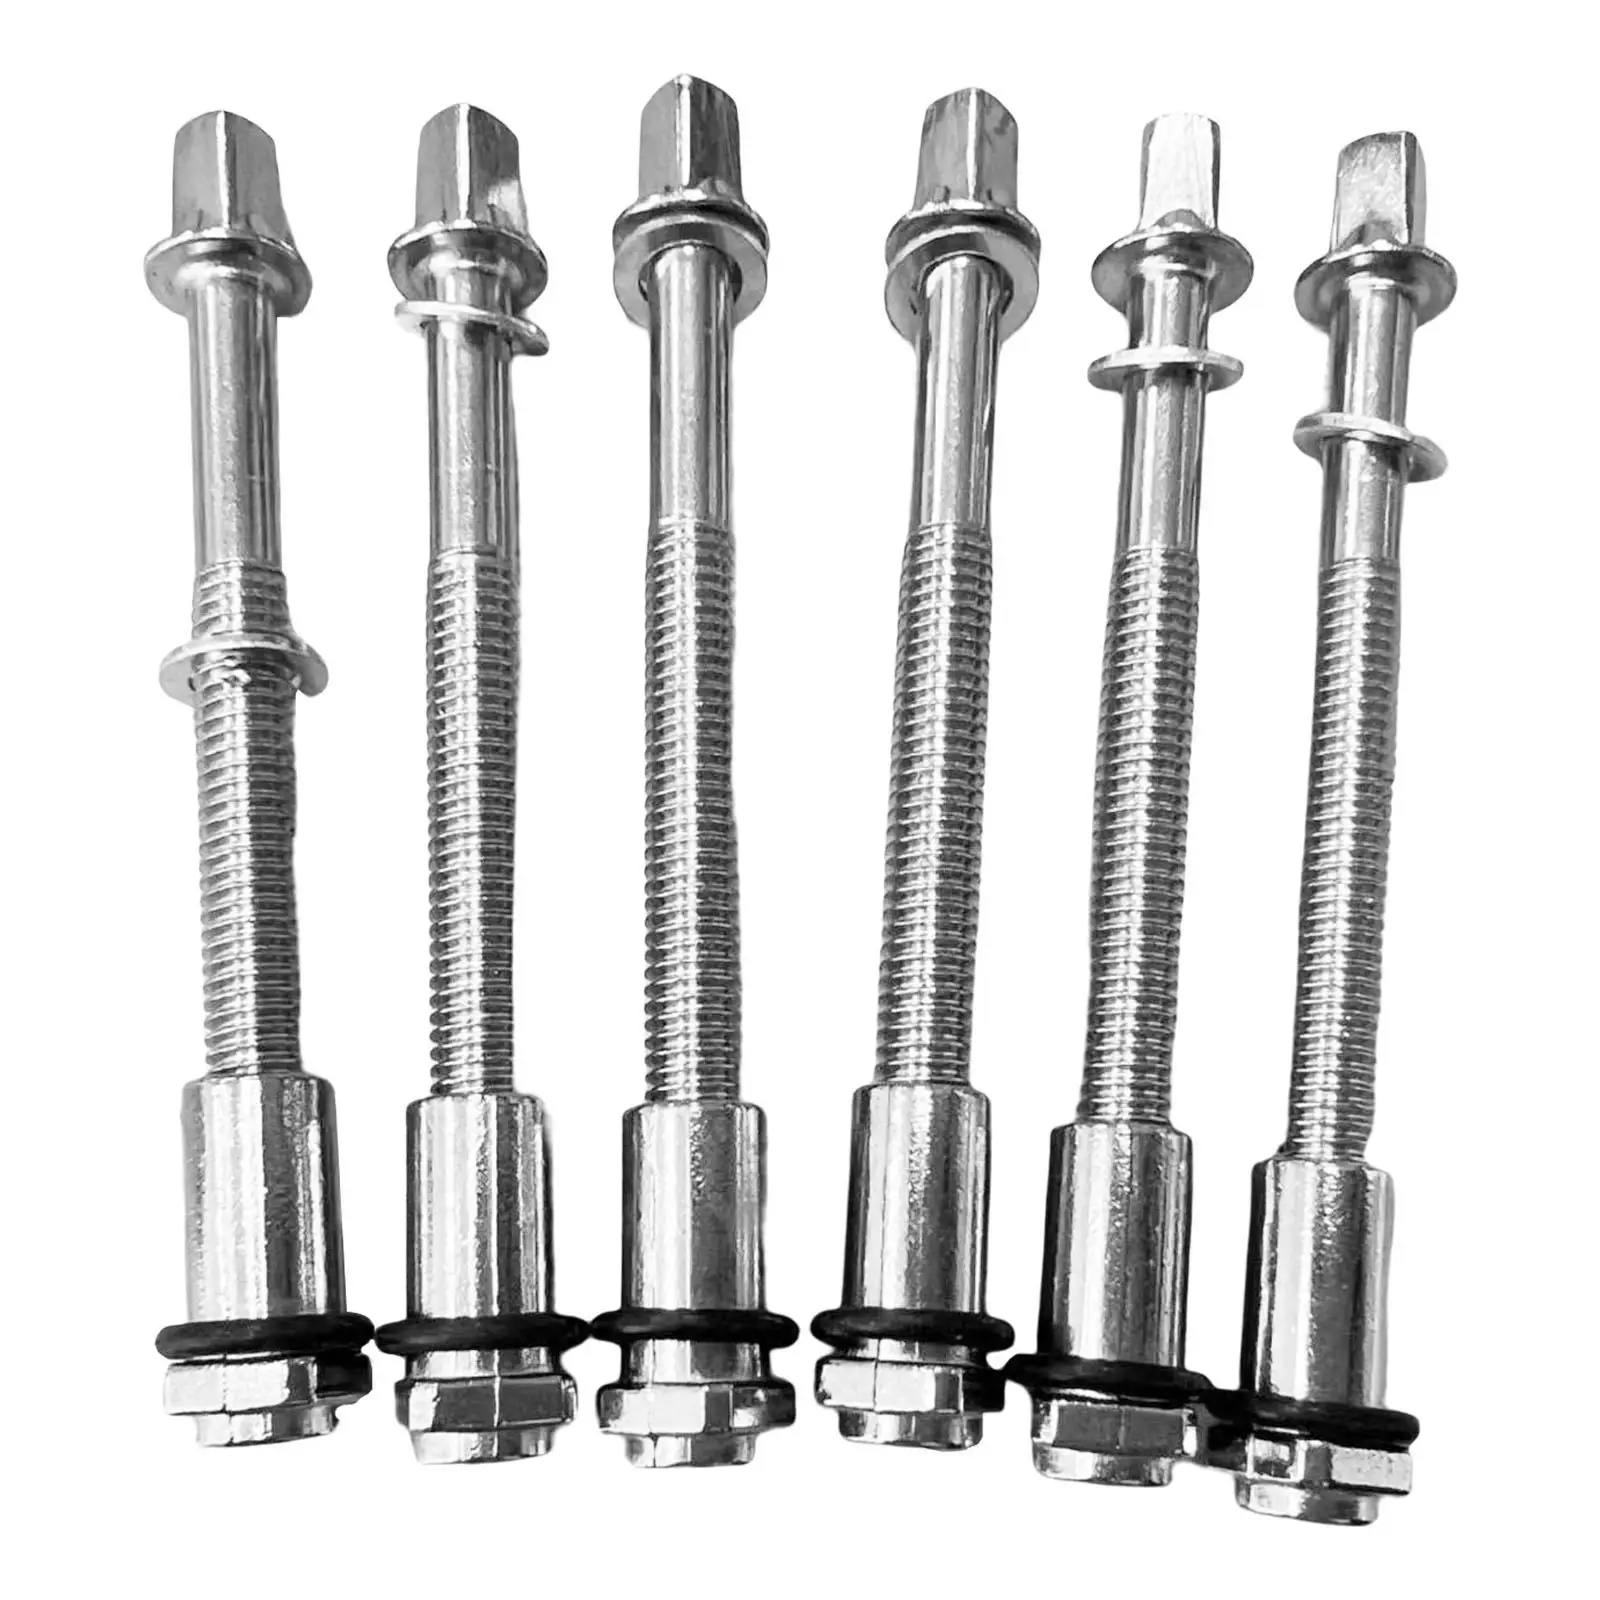 6x Drum Tension Rods with Washer Universal Stainless Steel Hardware 6mm for